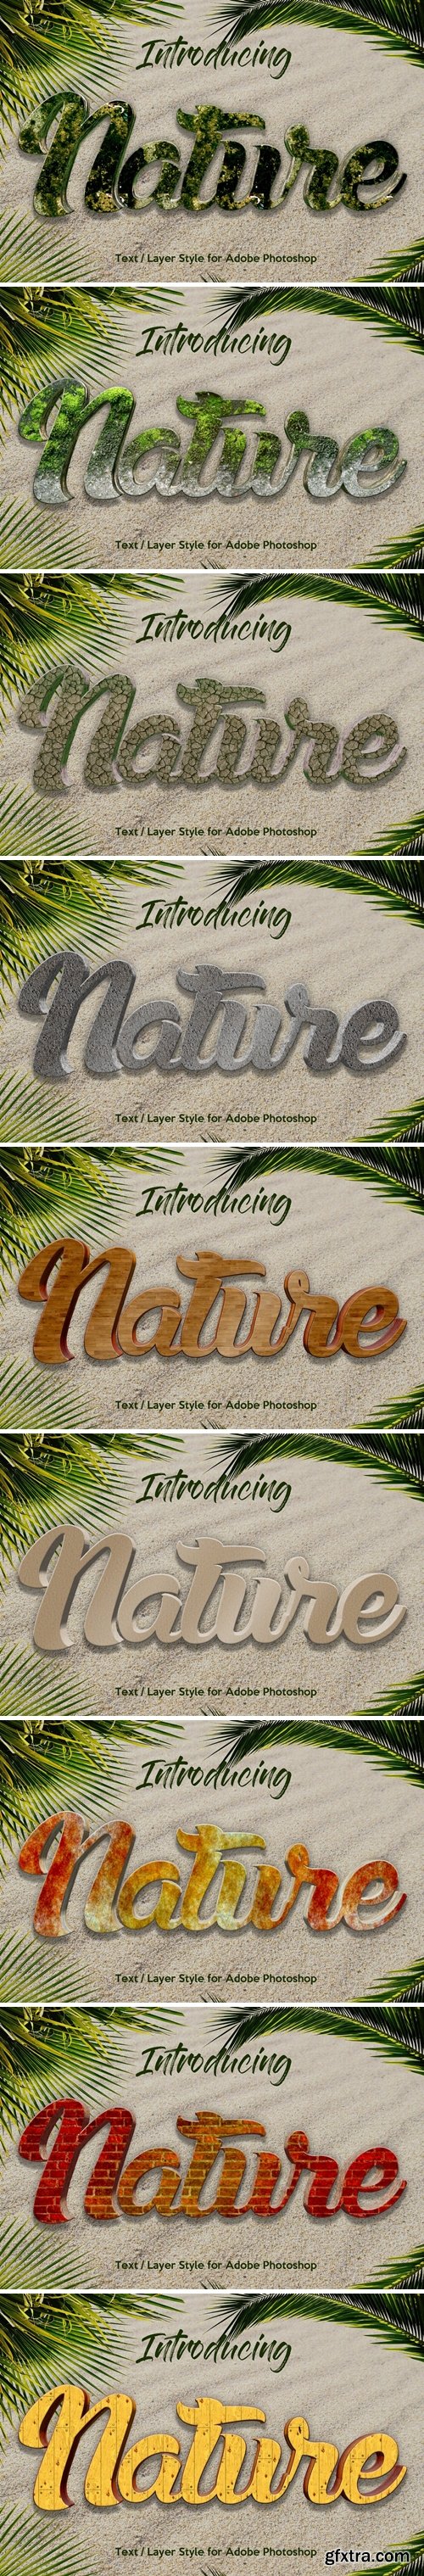 CM - 10 Nature Layer Style for Photoshop 3499610